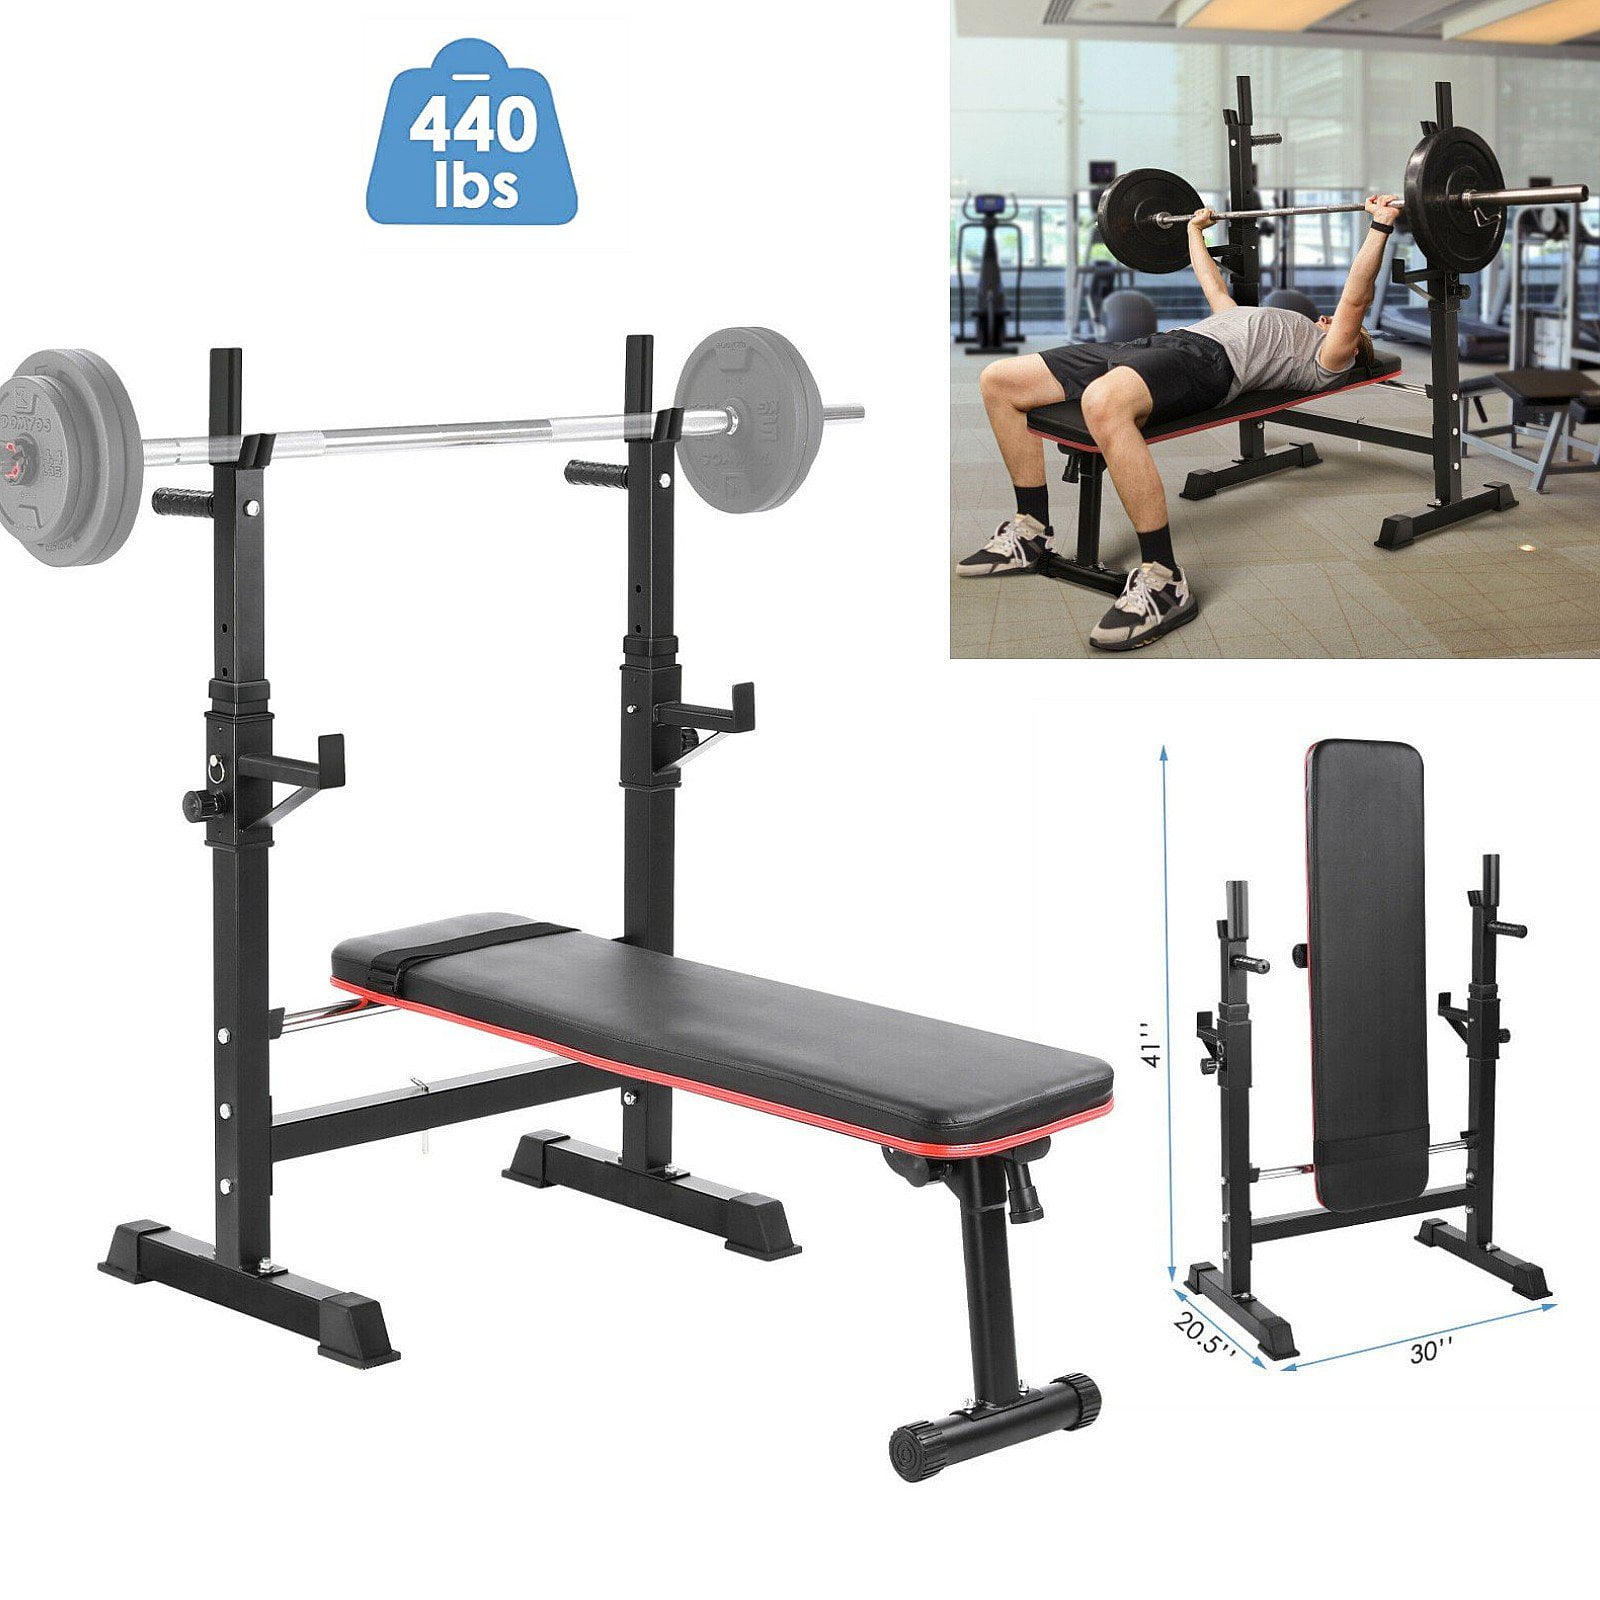 Weight Bench Press With Barbell Squat Rack Adjustable Fitness Gym Training Set 